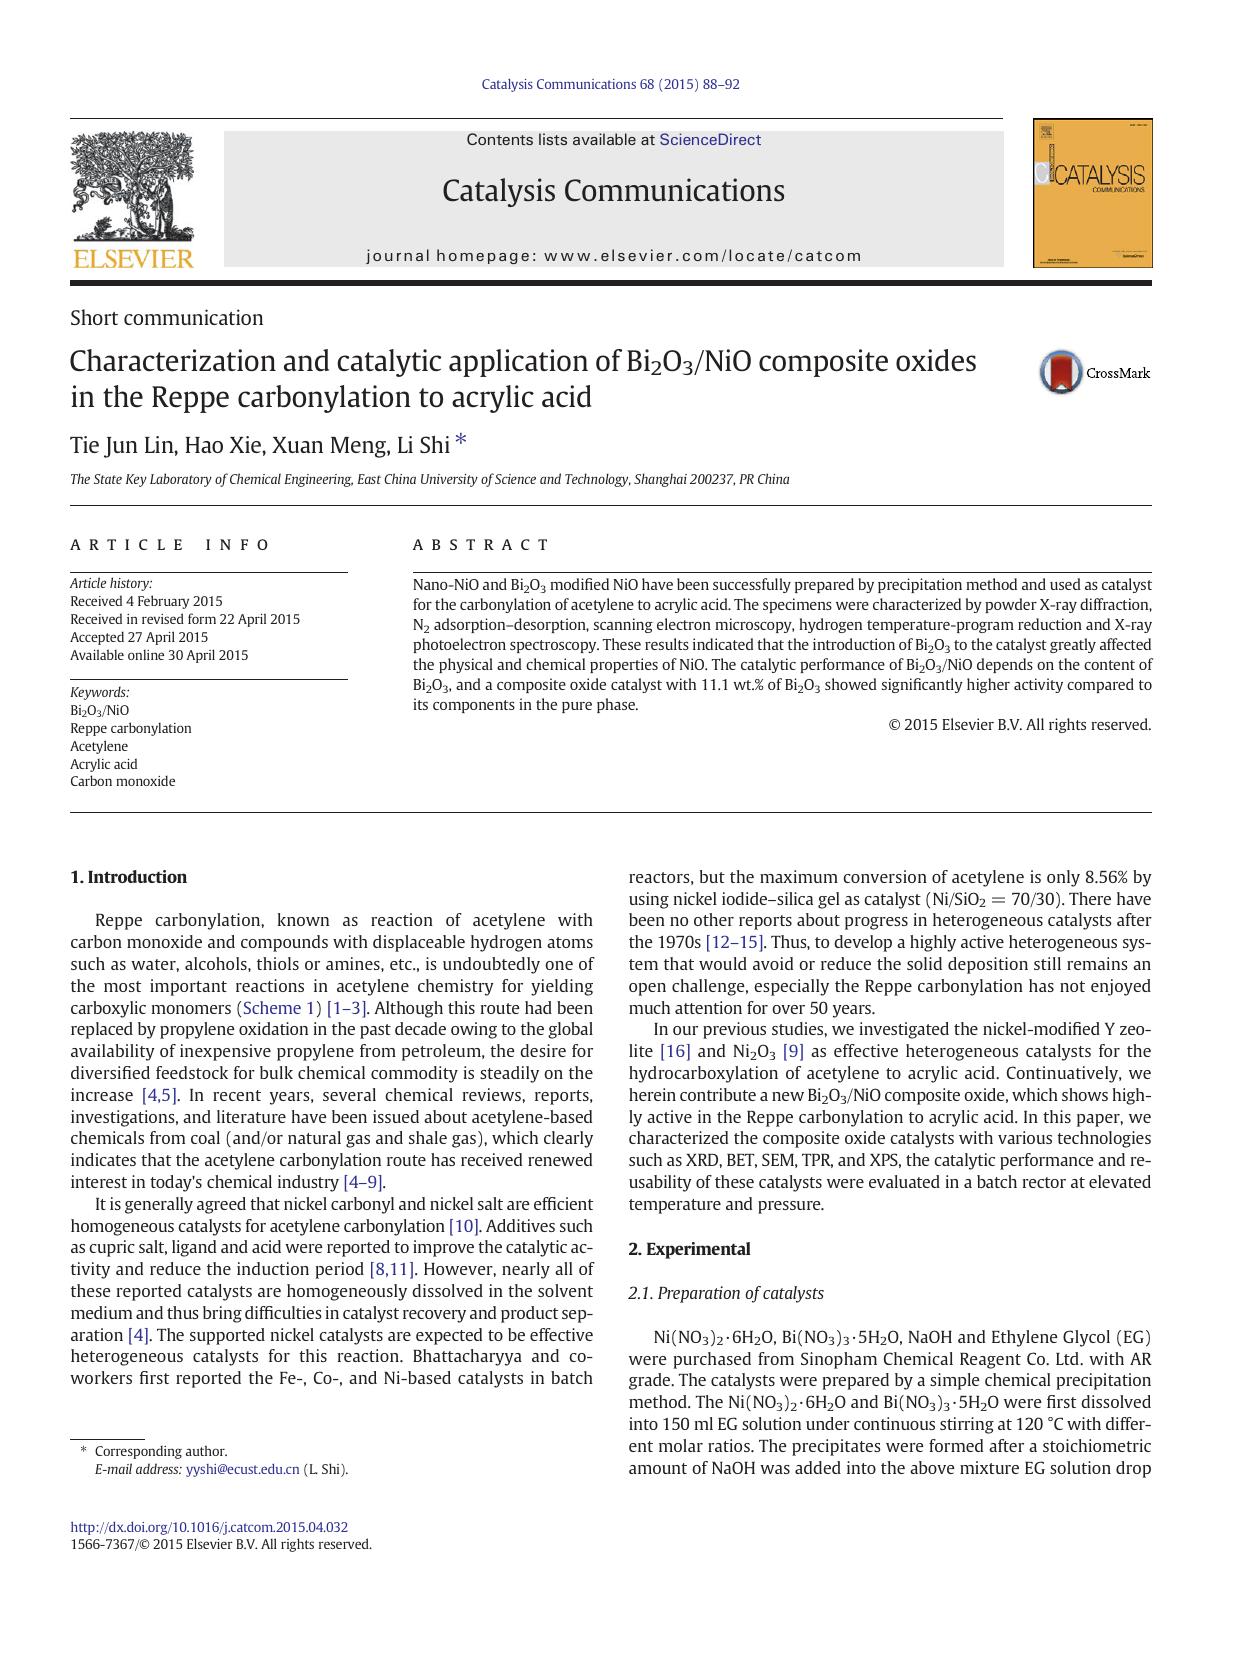 Characterization and catalytic application of Bi2O3NiO composite oxides in the Reppe carbonylation to acrylic acid by Tie Jun Lin & Hao Xie & Xuan Meng & Li Shi